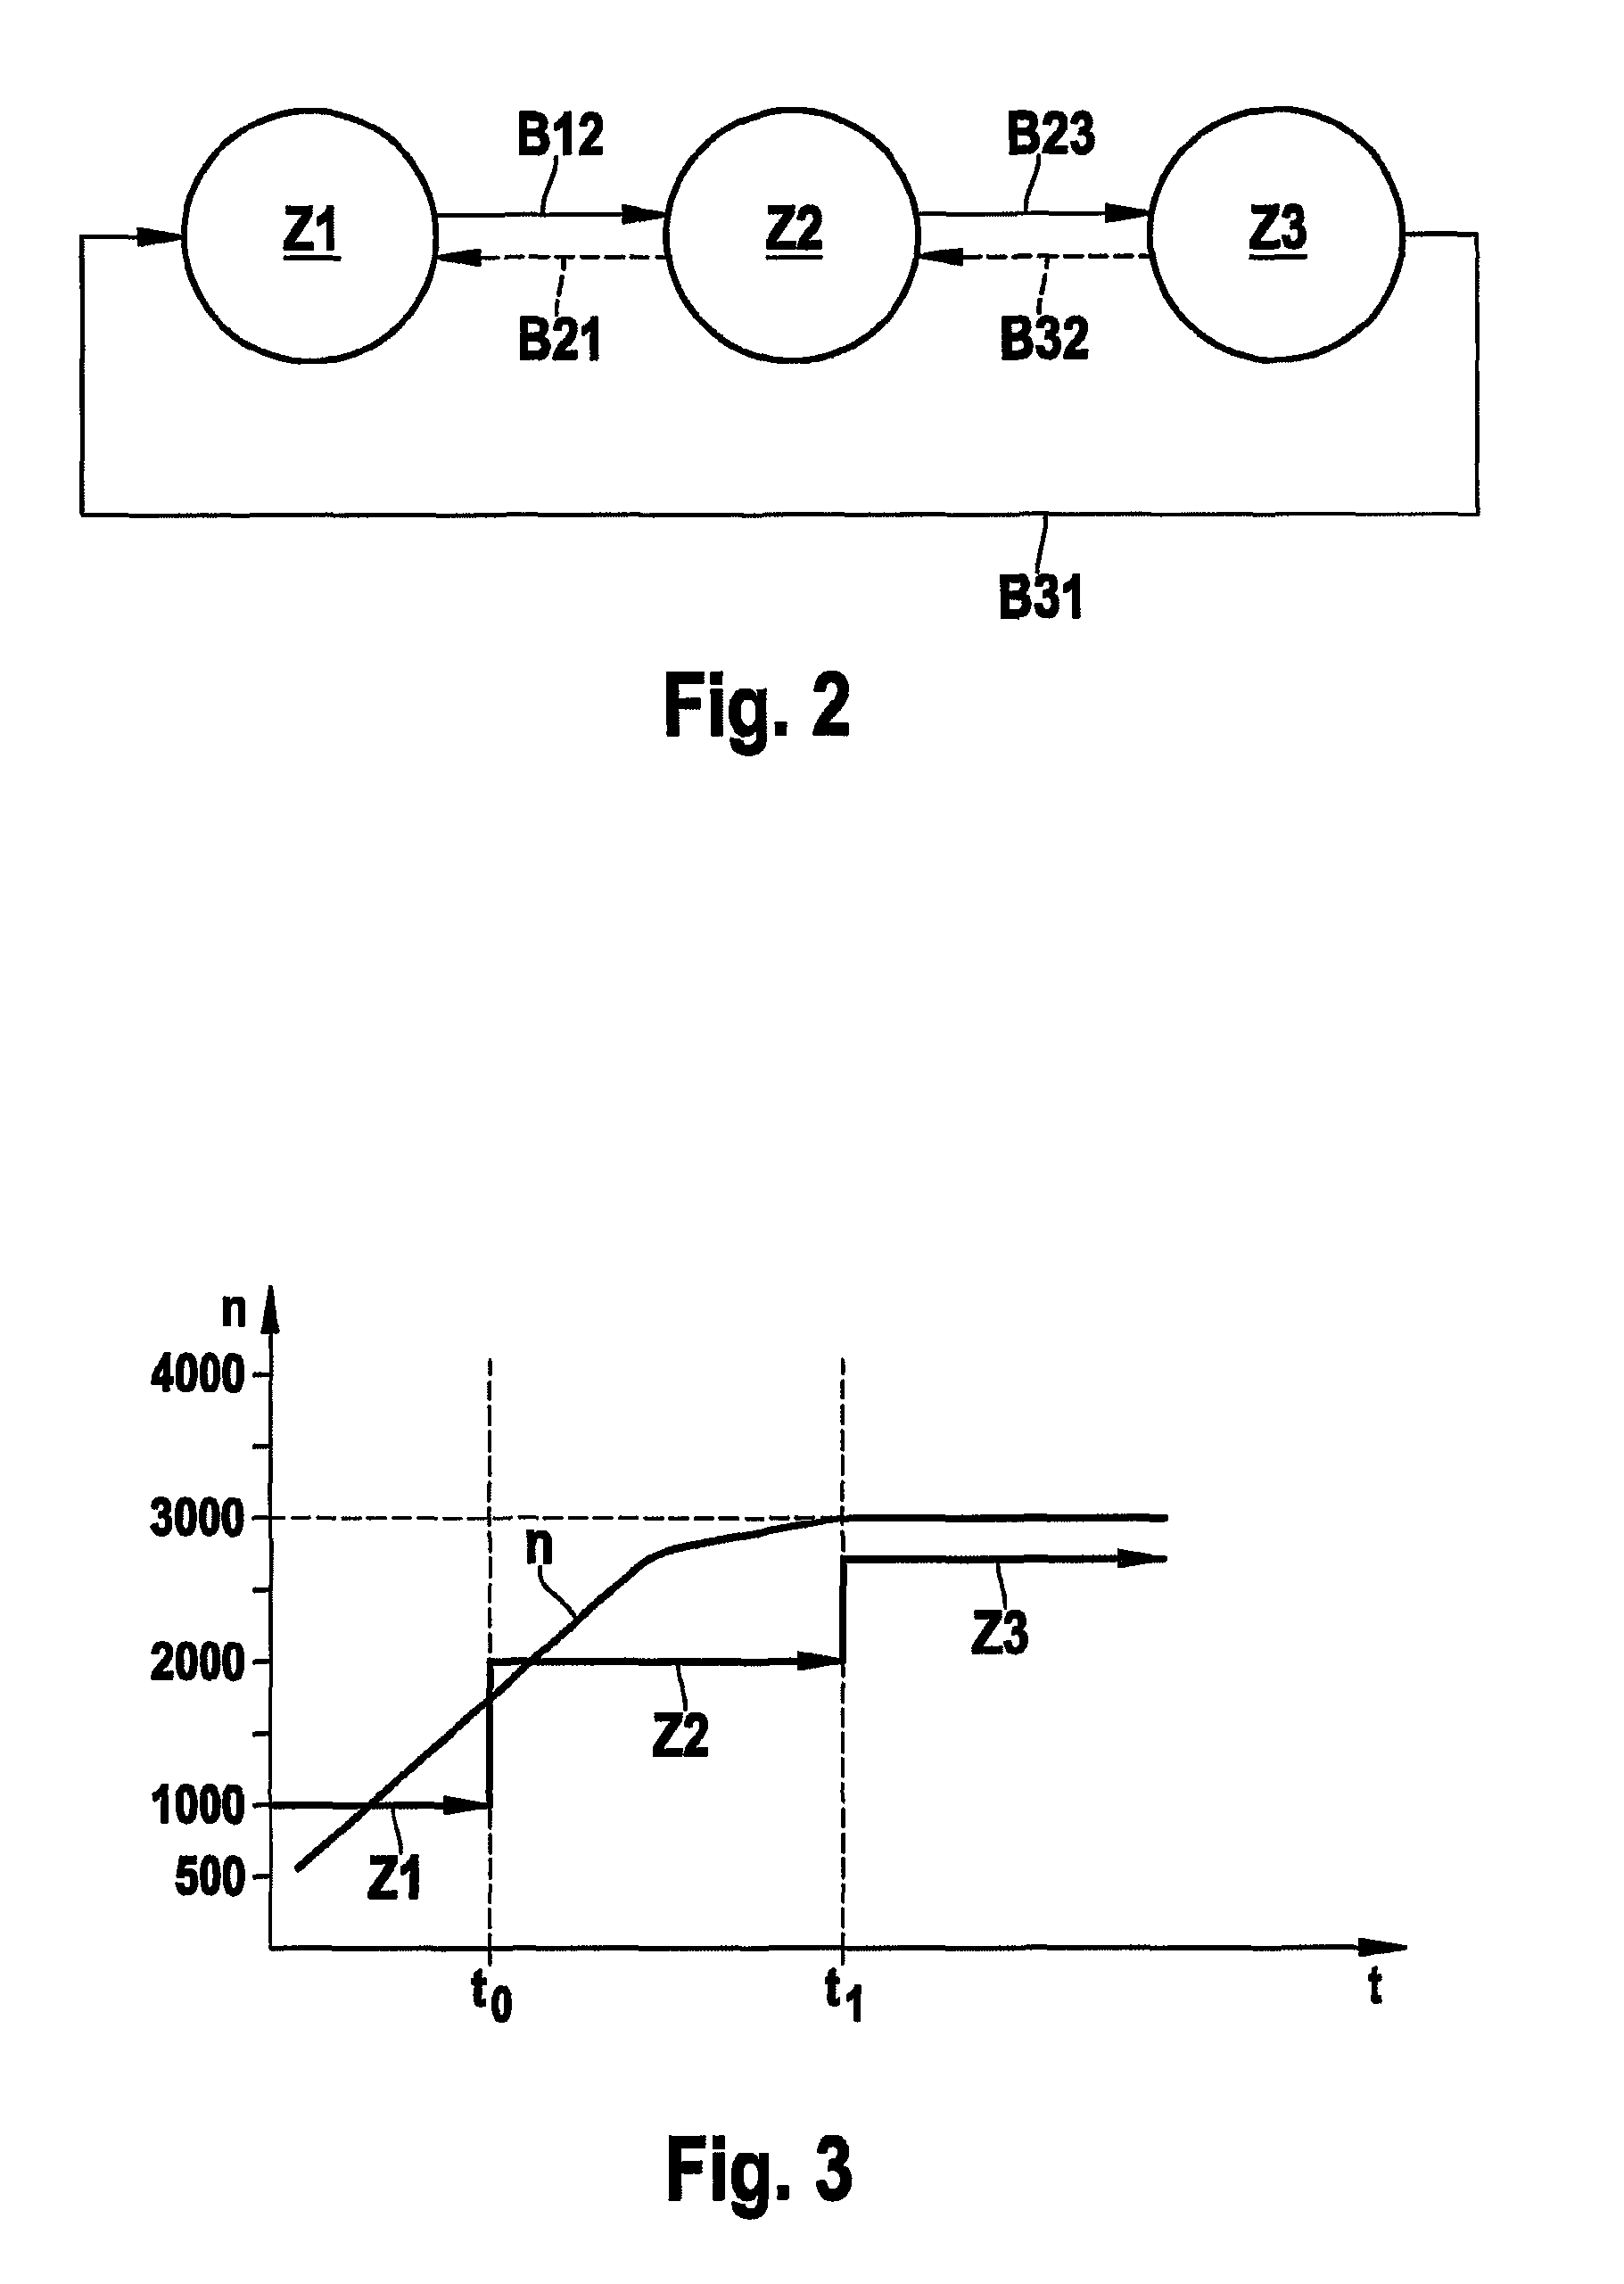 Method for shutting down an electric machine in the event of a malfunction